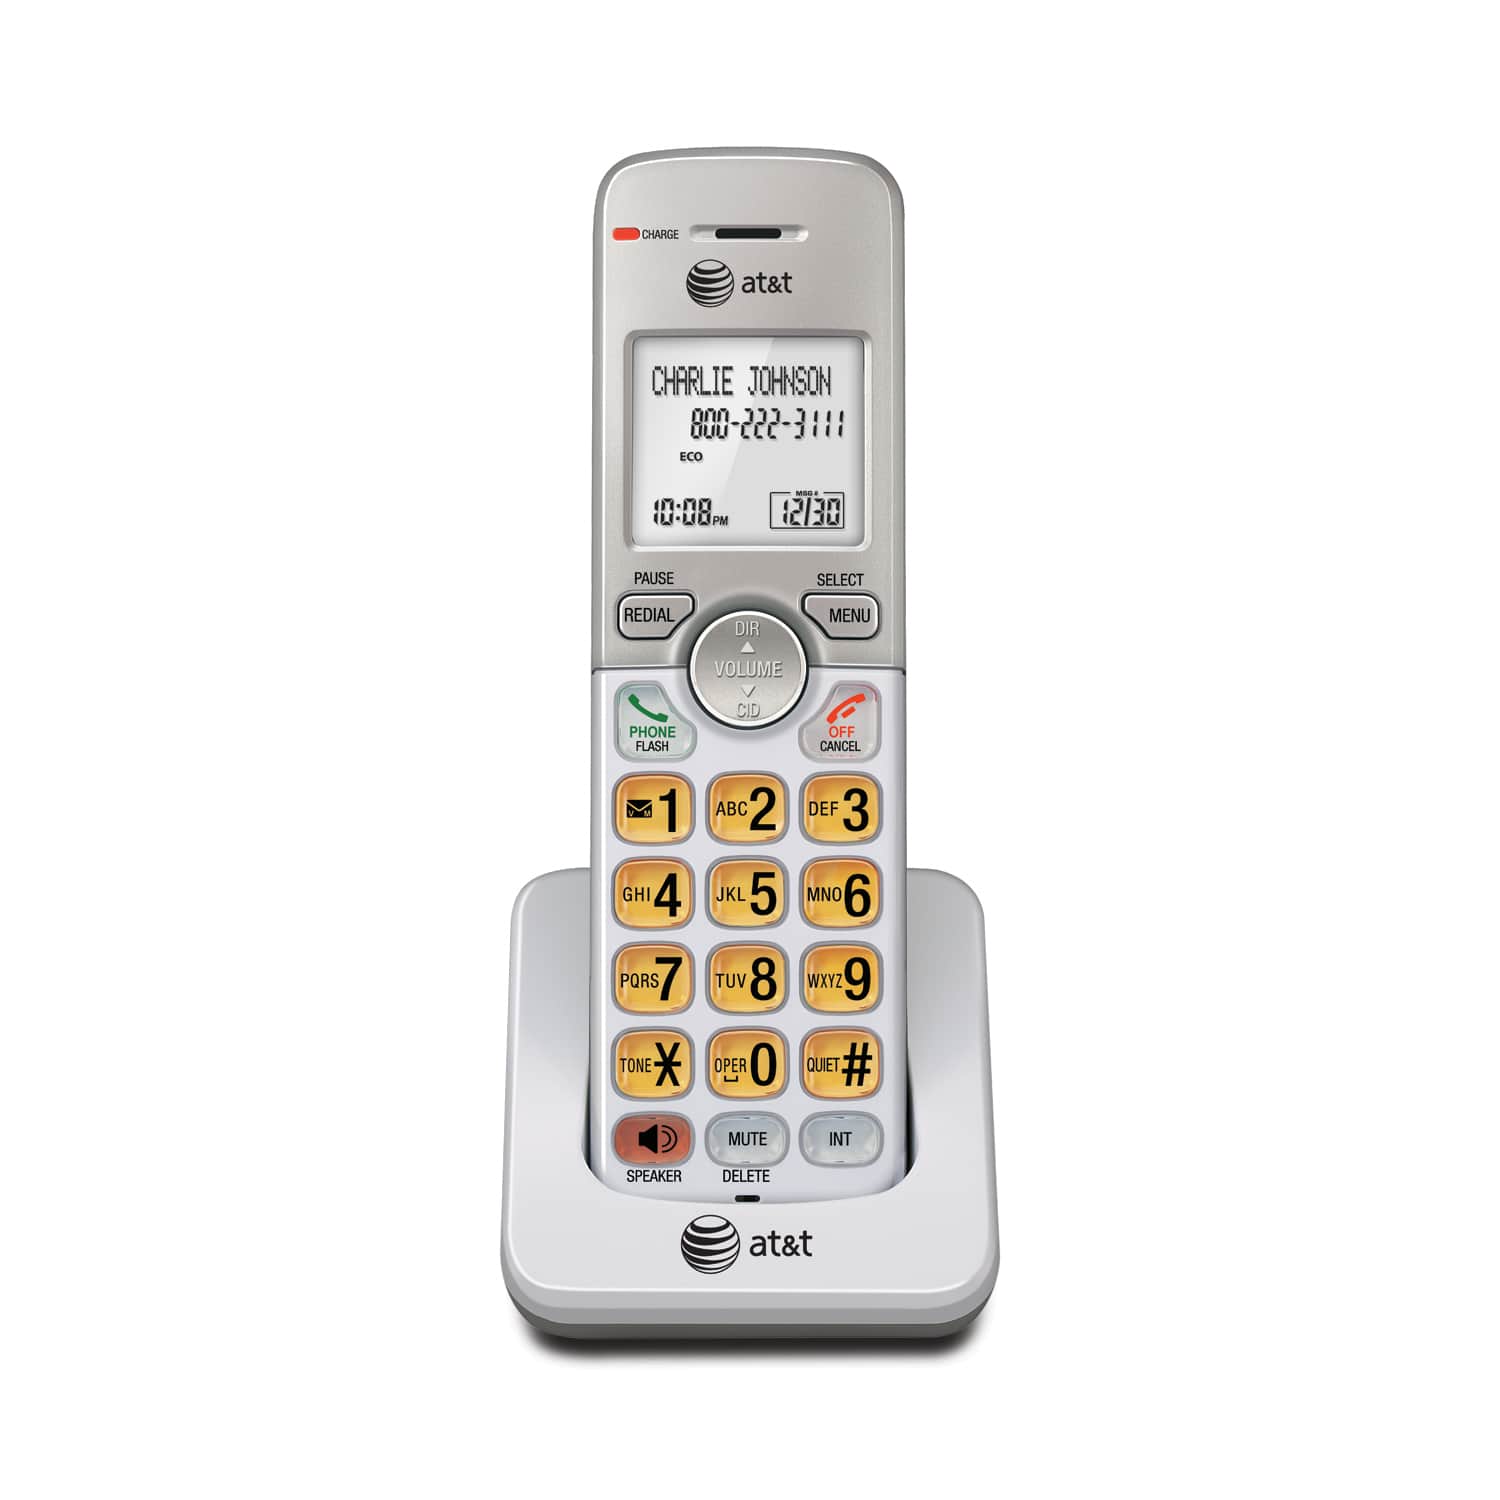 Accessory handset with Caller ID/call waiting